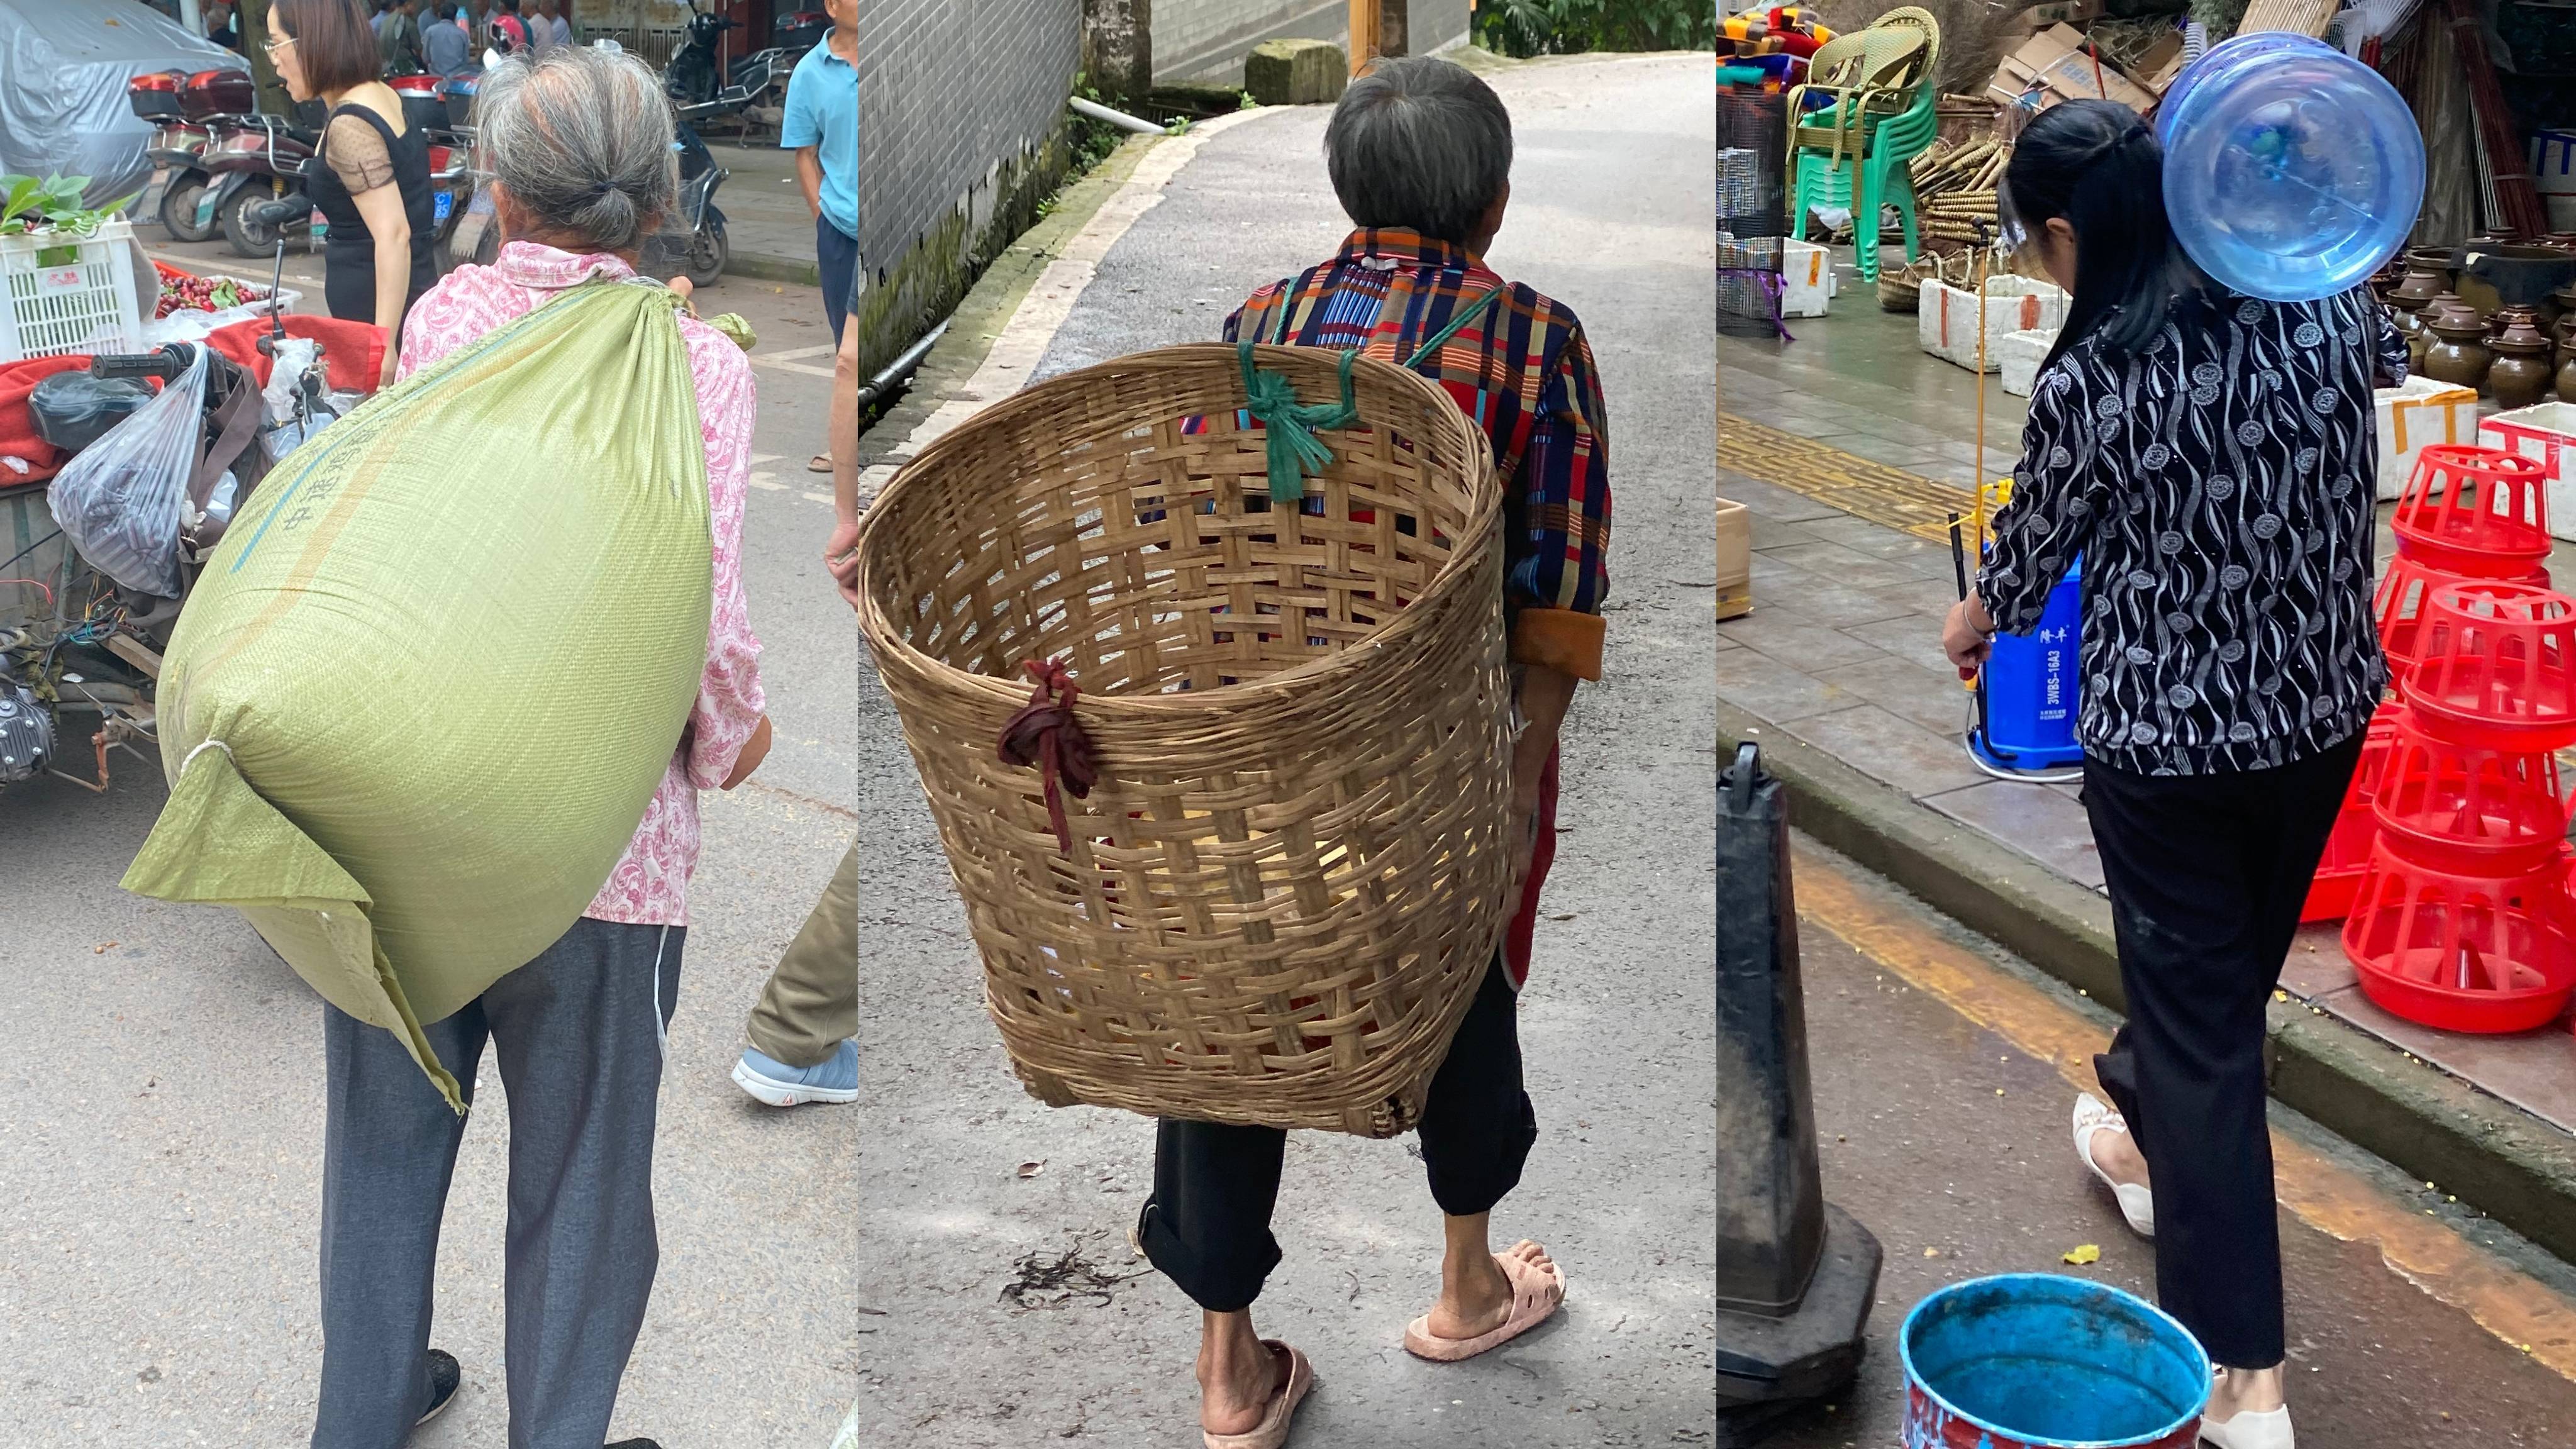 Three photos show three different women, viewed from behind, shouldering an overstuffed sack, an enormous rattan basket, and a heavy plastic water bottle, respectively.